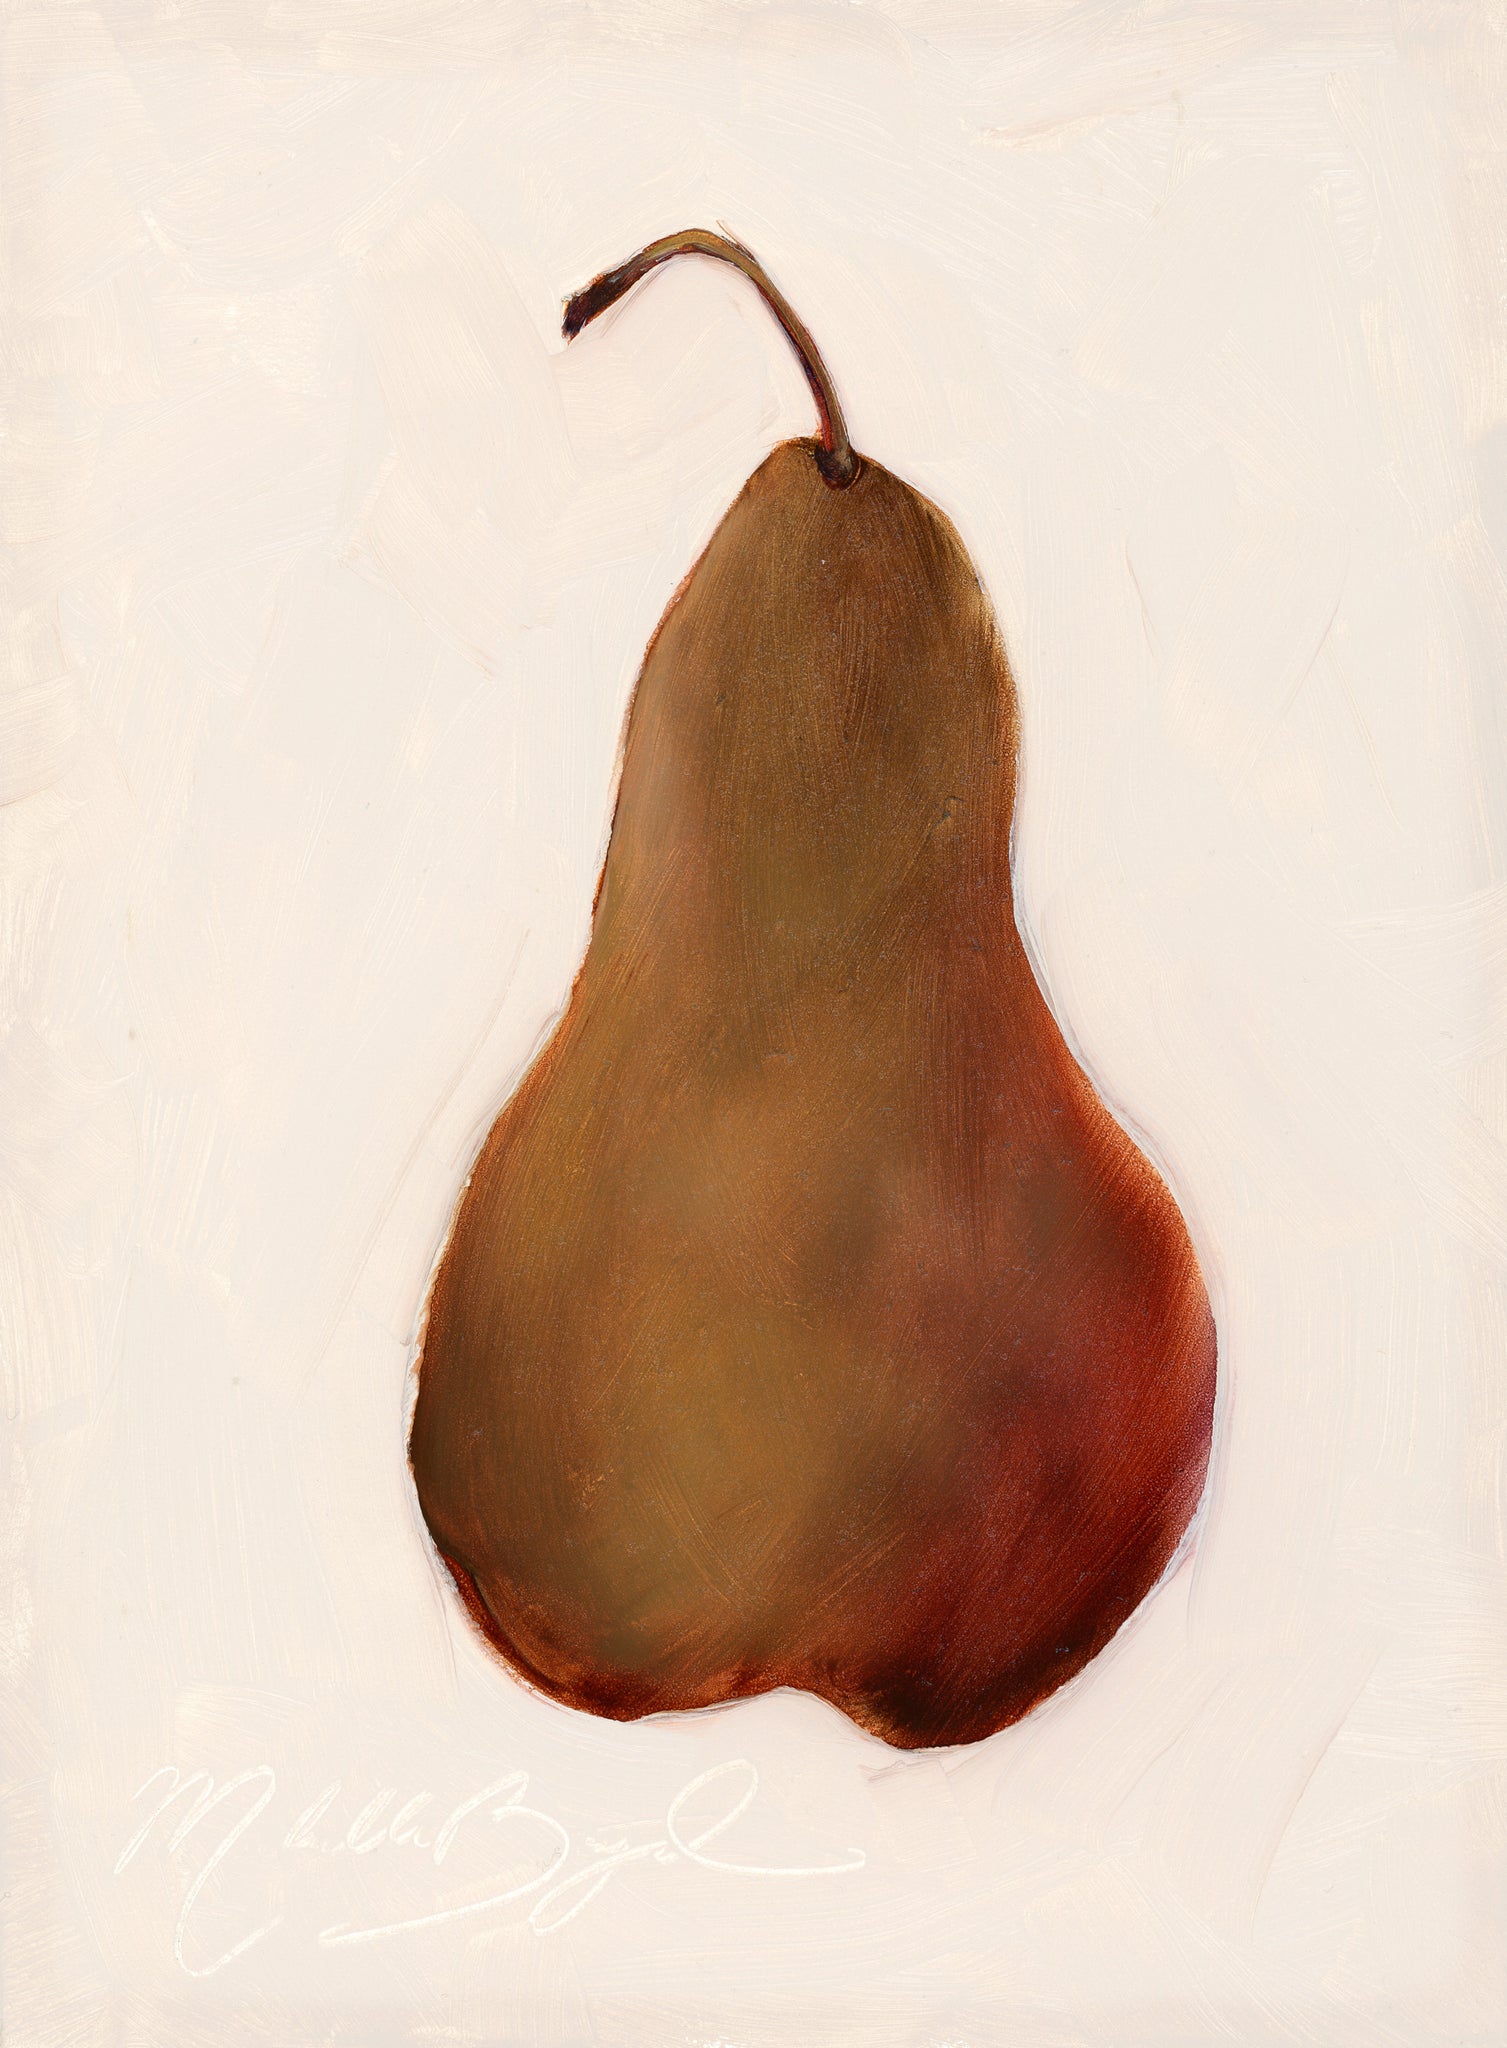 Pear No. 03 - 6x8" Oil Painting